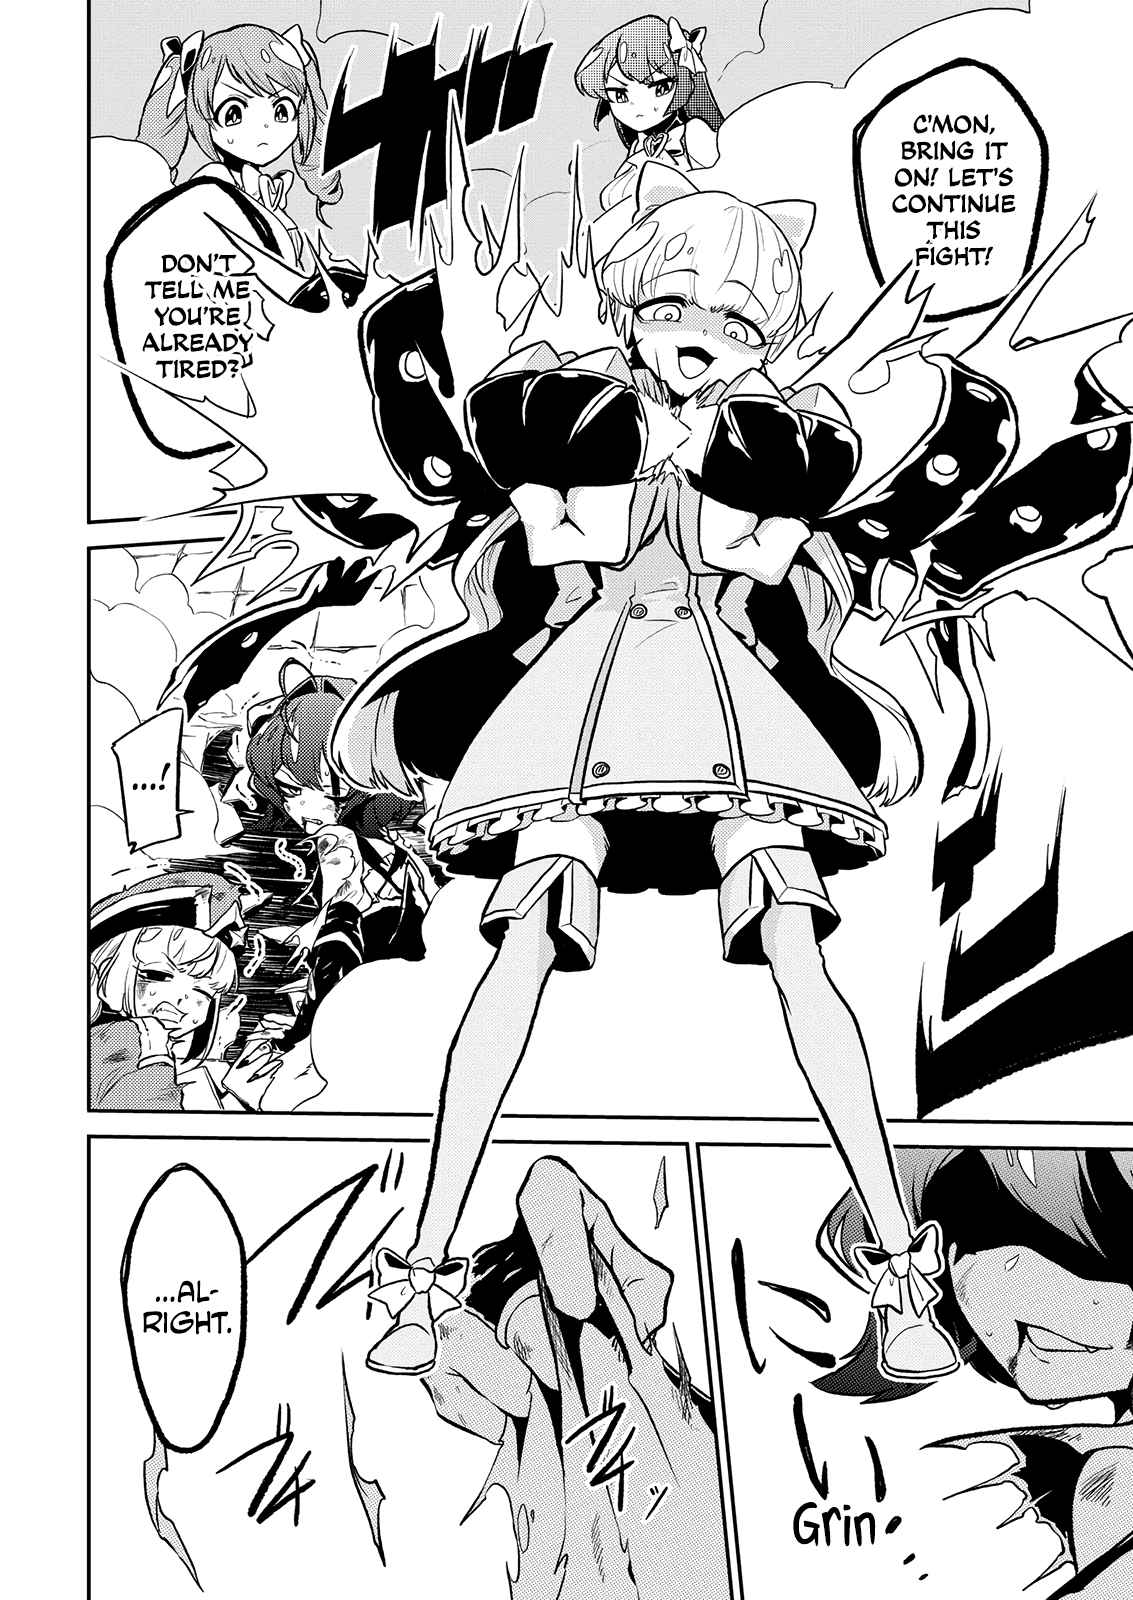 Looking Up To Magical Girls Vol. 2 Ch. 8